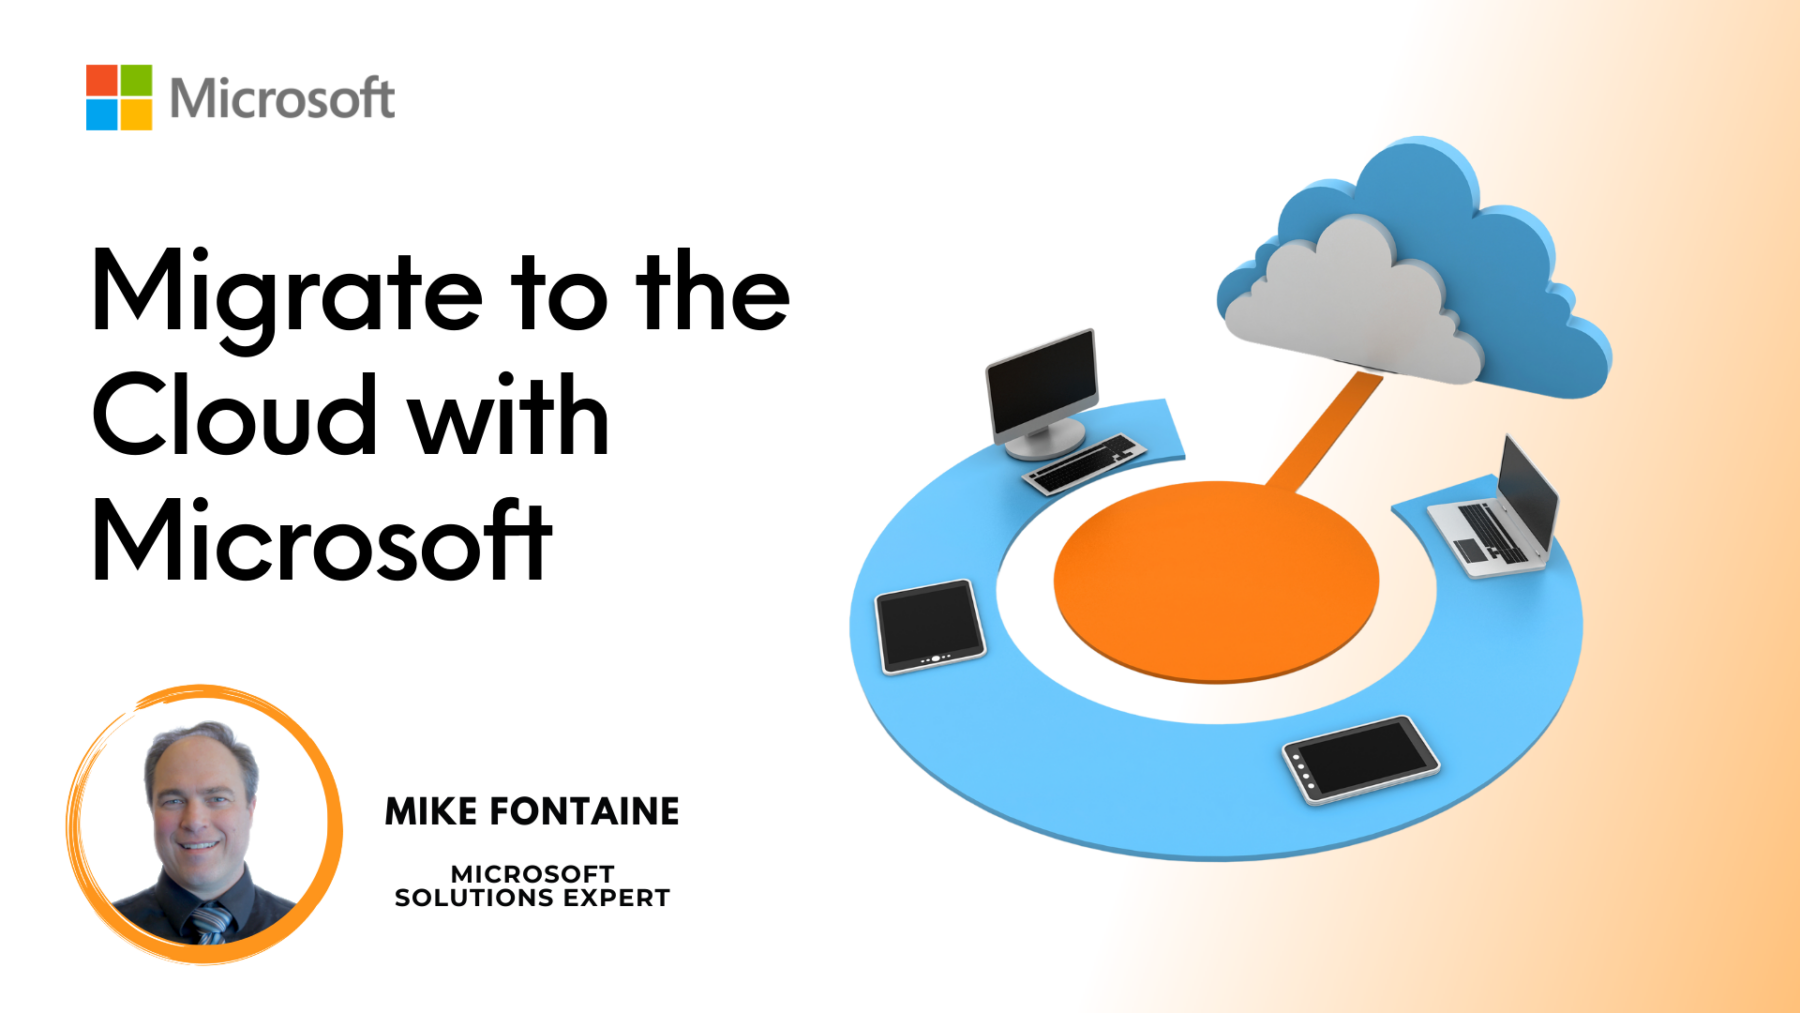 Migrate to the Cloud with Microsoft